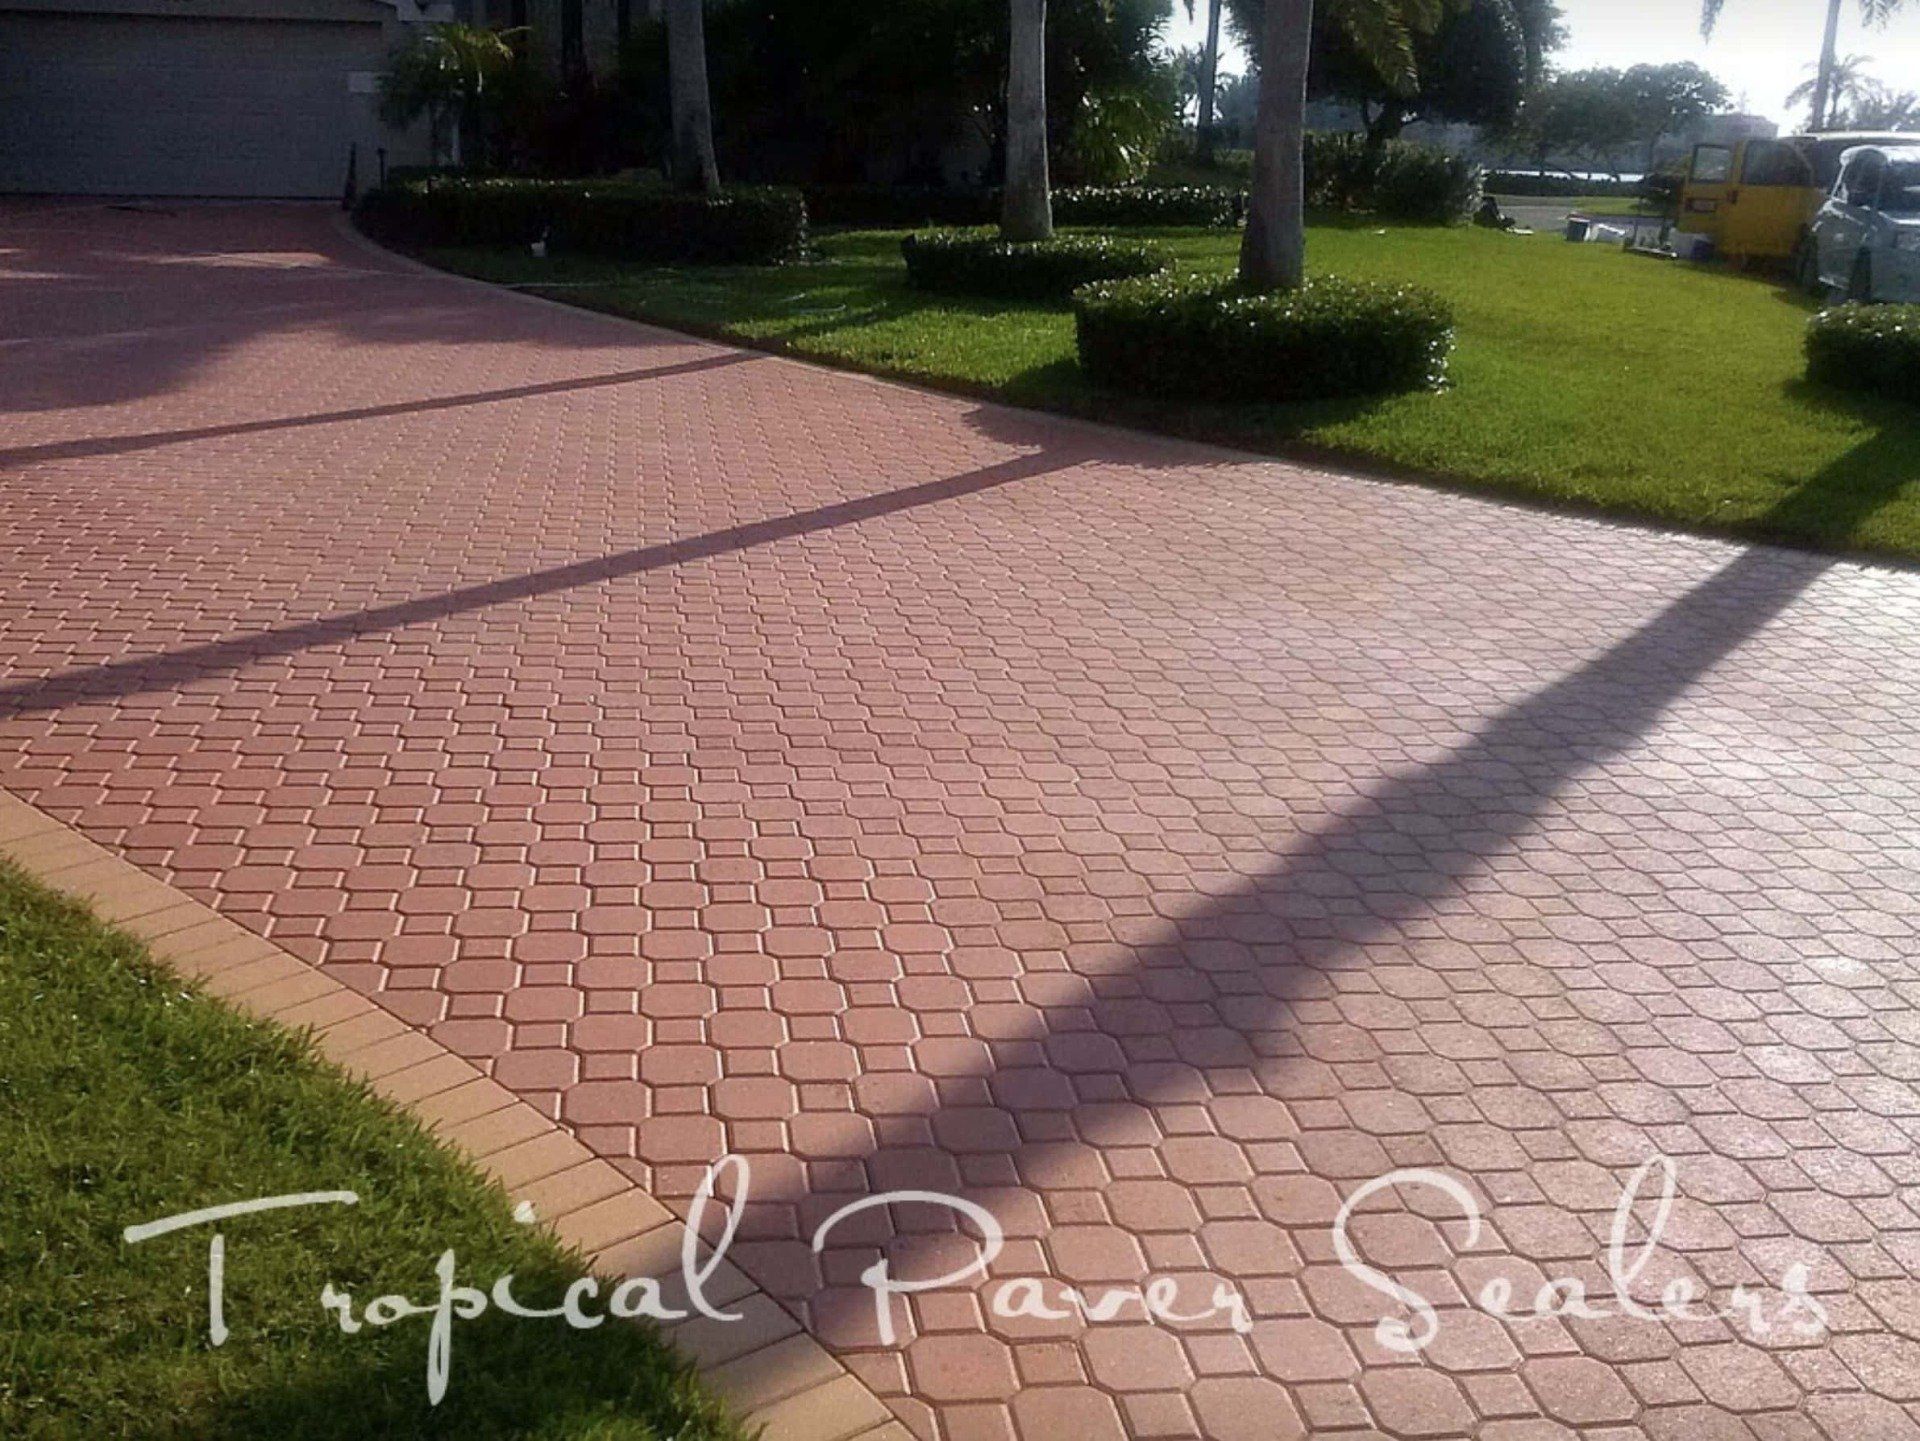 Commercial Paver Sealing